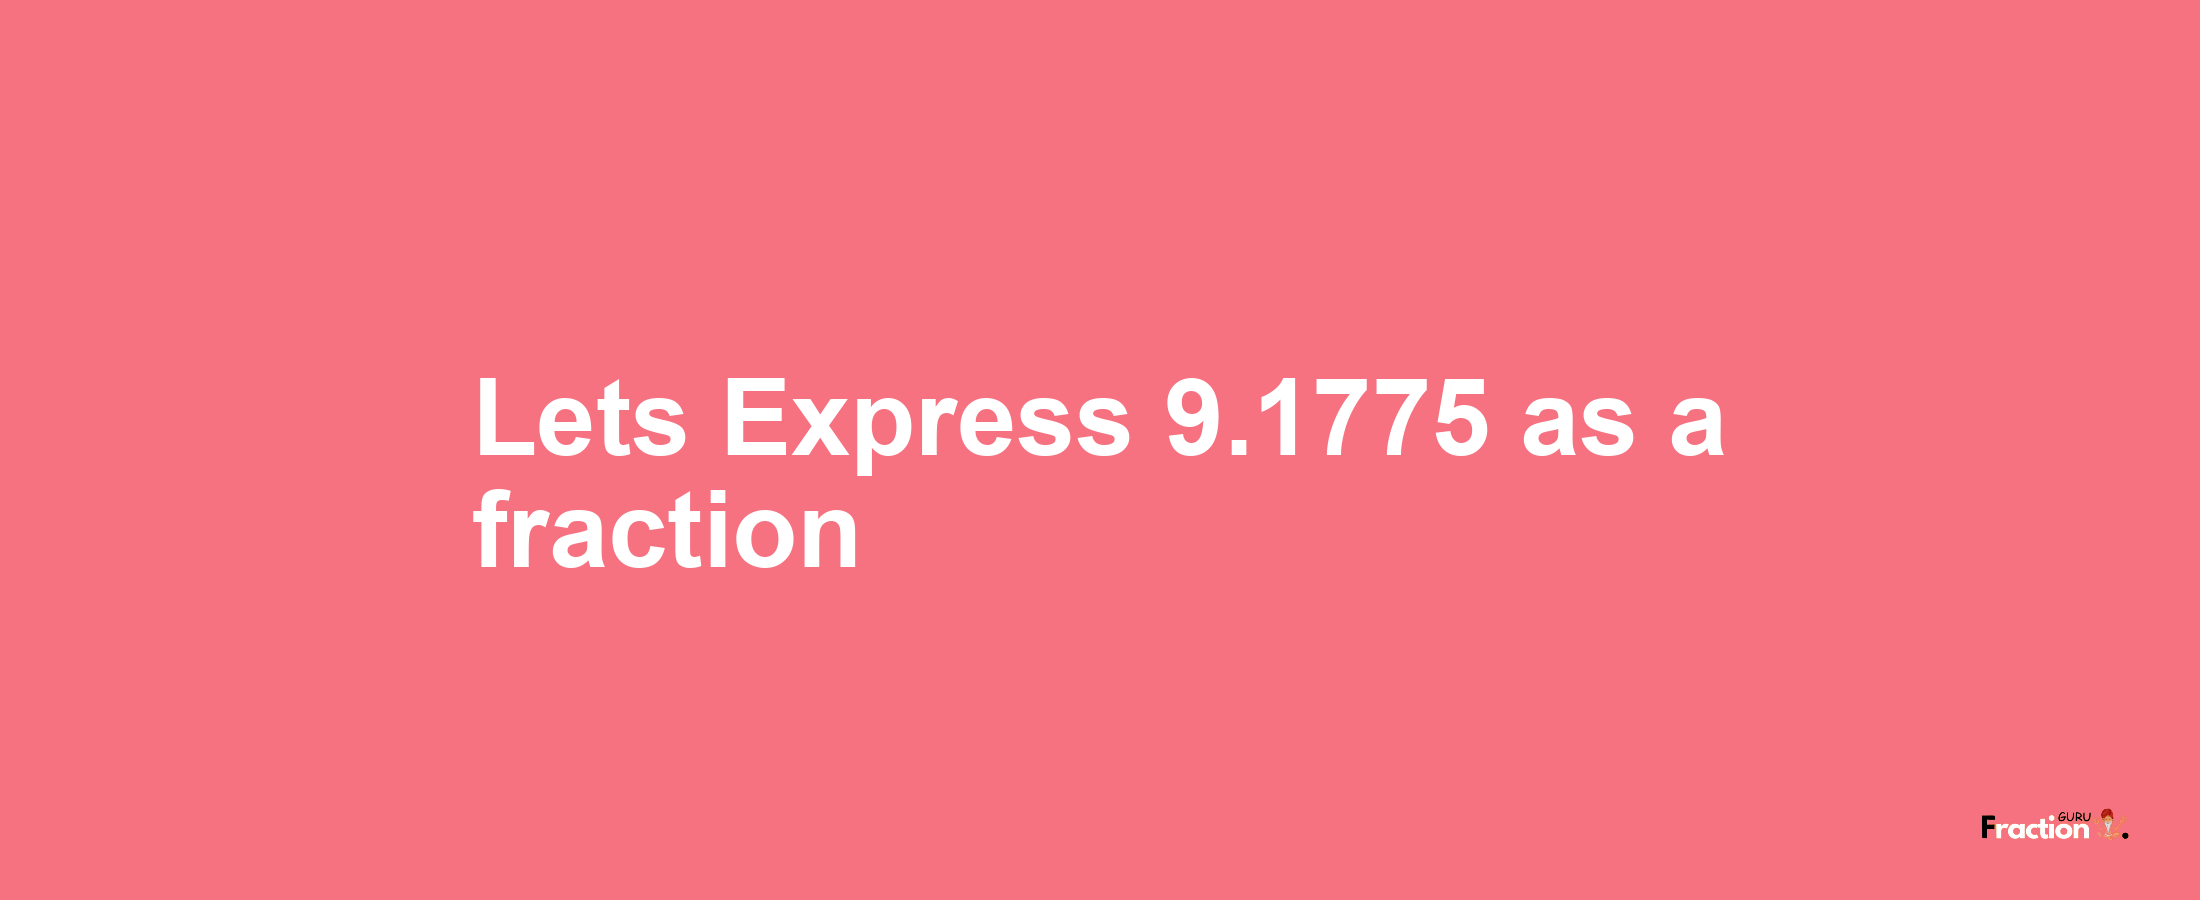 Lets Express 9.1775 as afraction